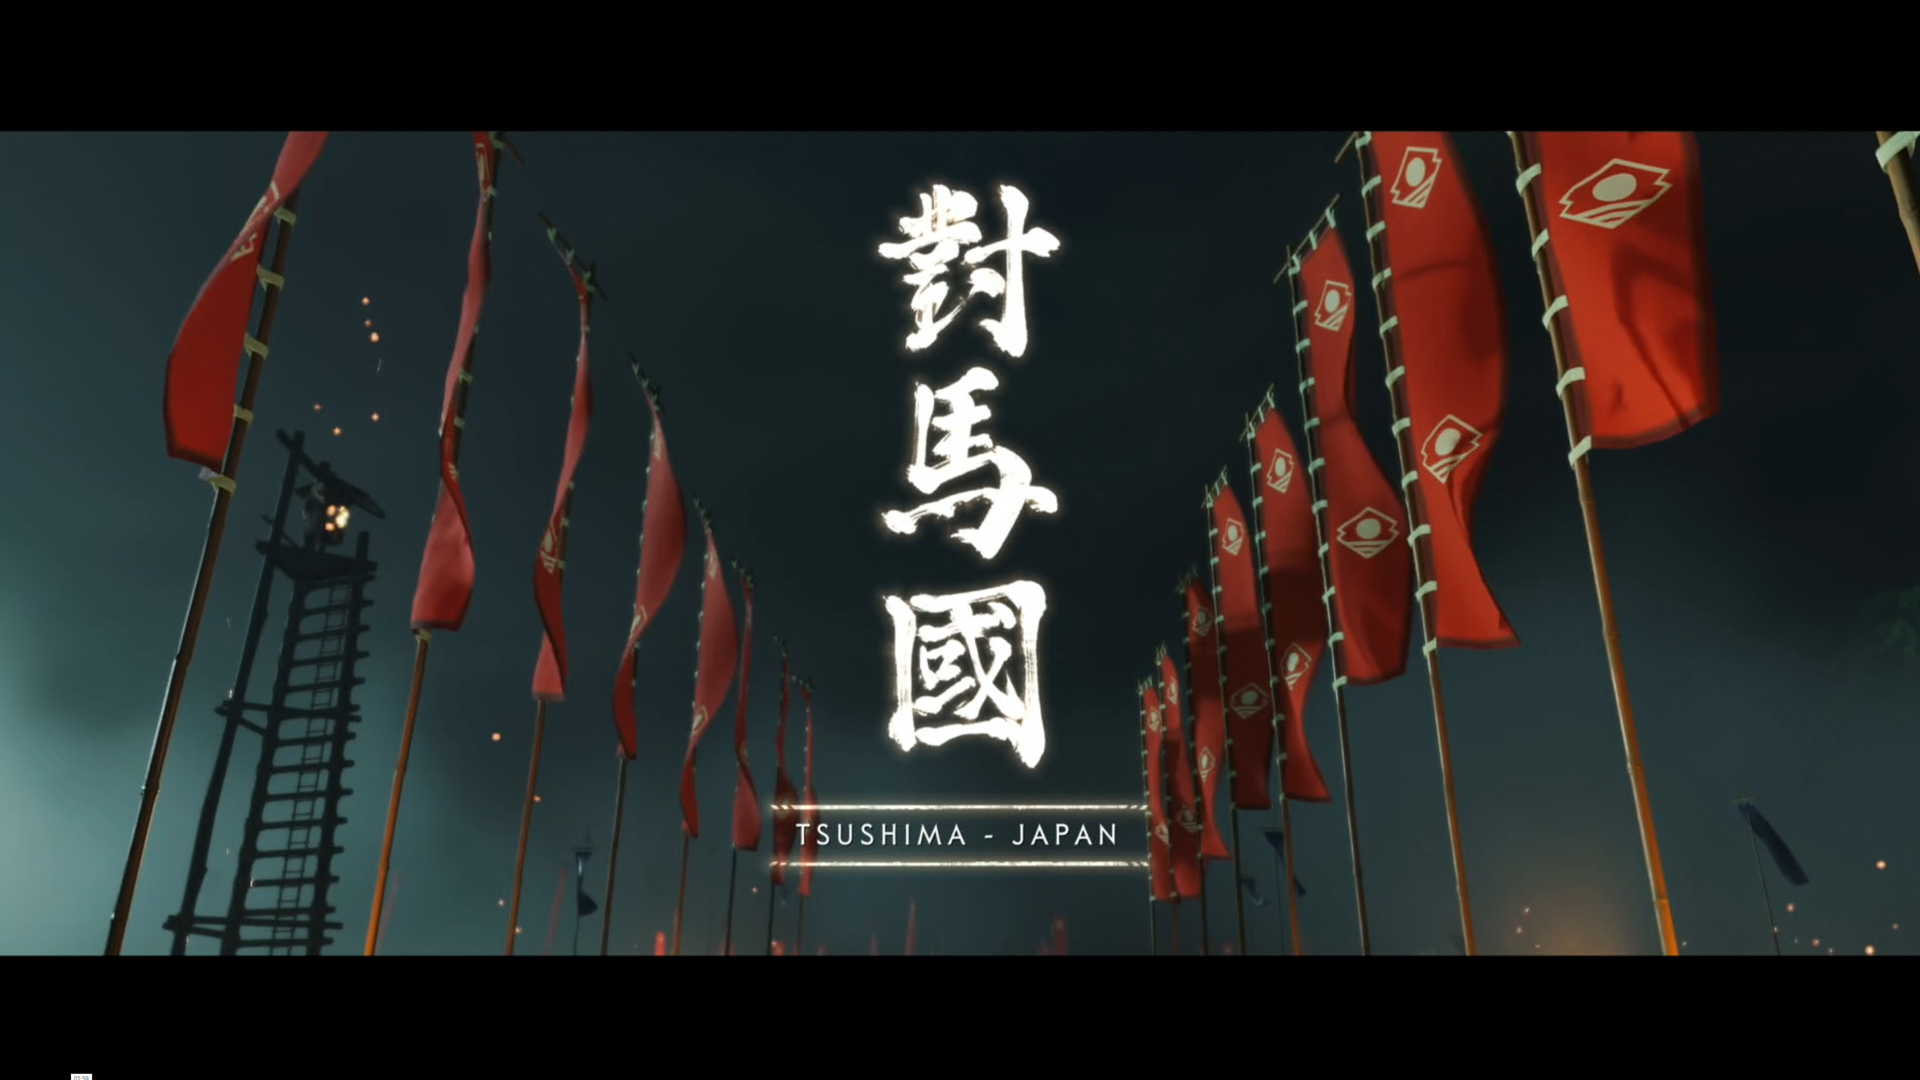 Ghost Of Tsushima length: How long is Ghost of Tsushima, and how many acts  are there?